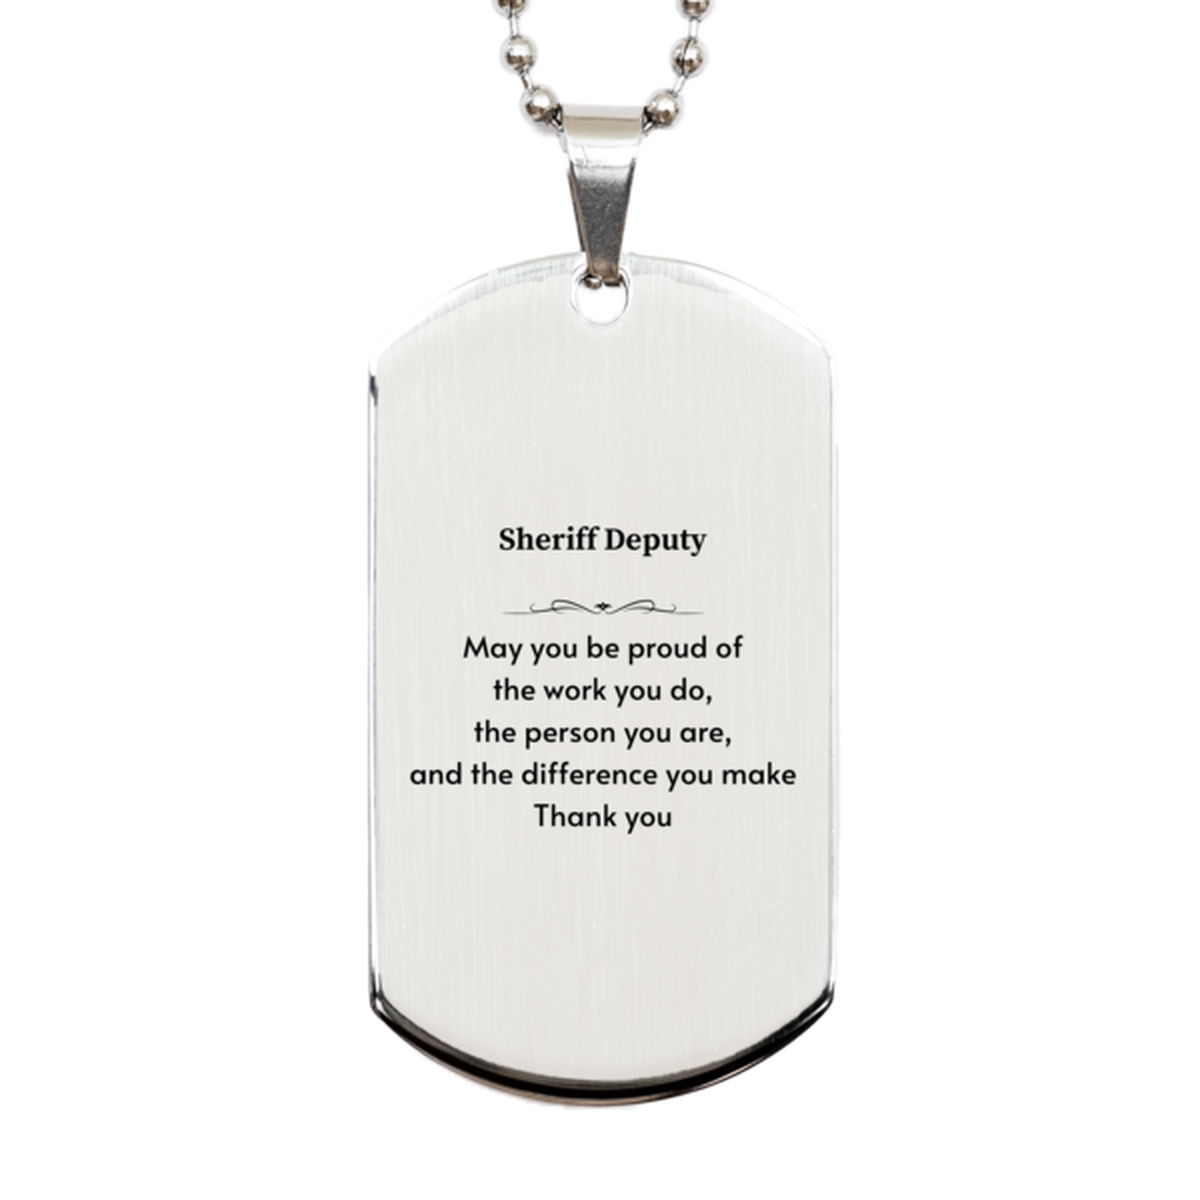 Heartwarming Silver Dog Tag Retirement Coworkers Gifts for Sheriff Deputy, Sheriff Deputy May You be proud of the work you do, the person you are Gifts for Boss Men Women Friends